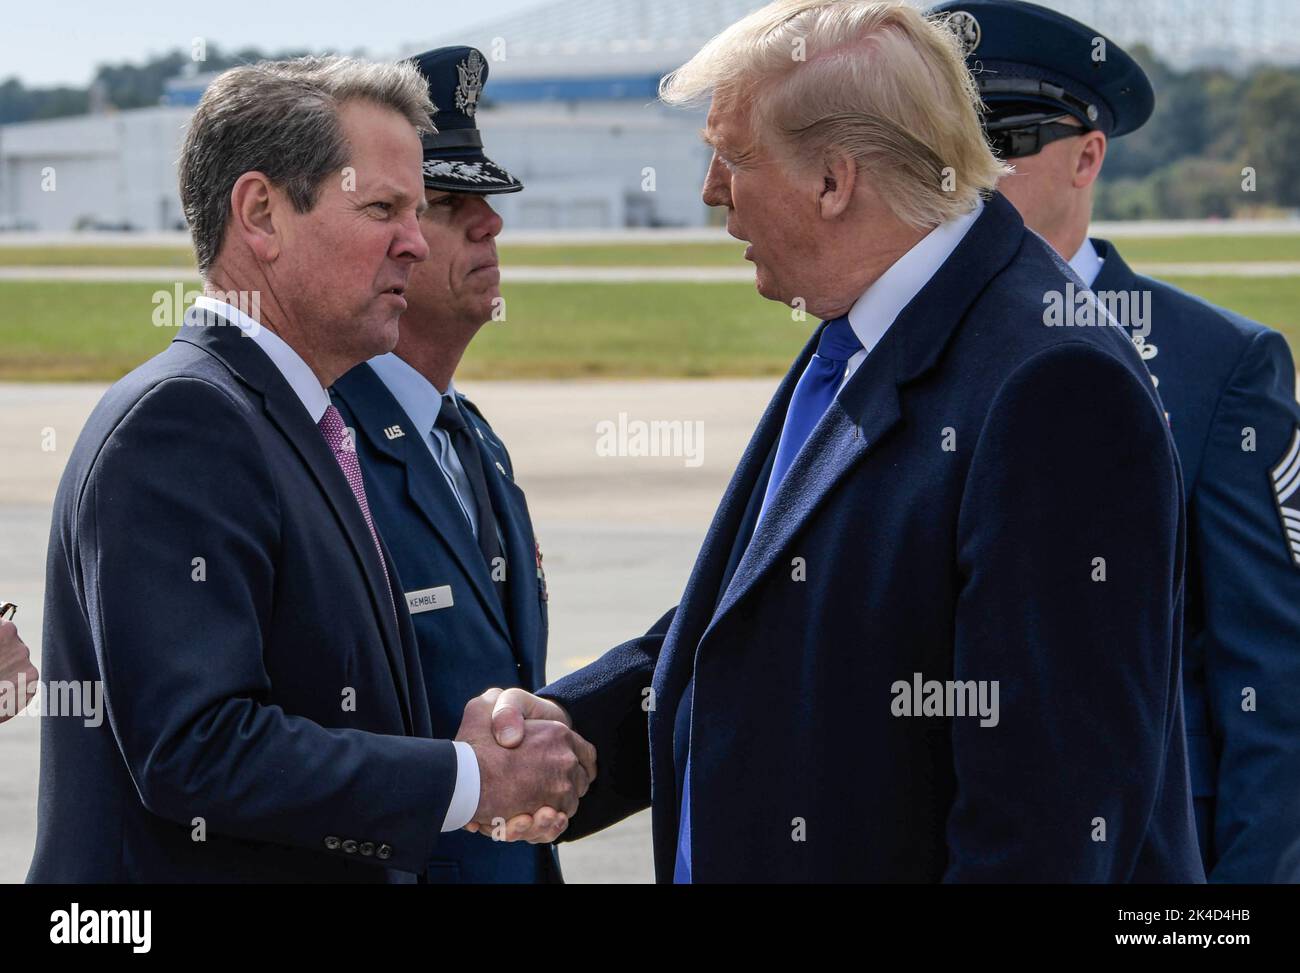 President Donald Trump shakes hands with Georgia Governor Brian Kemp at Dobbins Air Reserve Base in Marietta, Georgia, on November 8, 2019. The President greeted military and community members briefly before heading into Atlanta to attend an event. (USA) Stock Photo